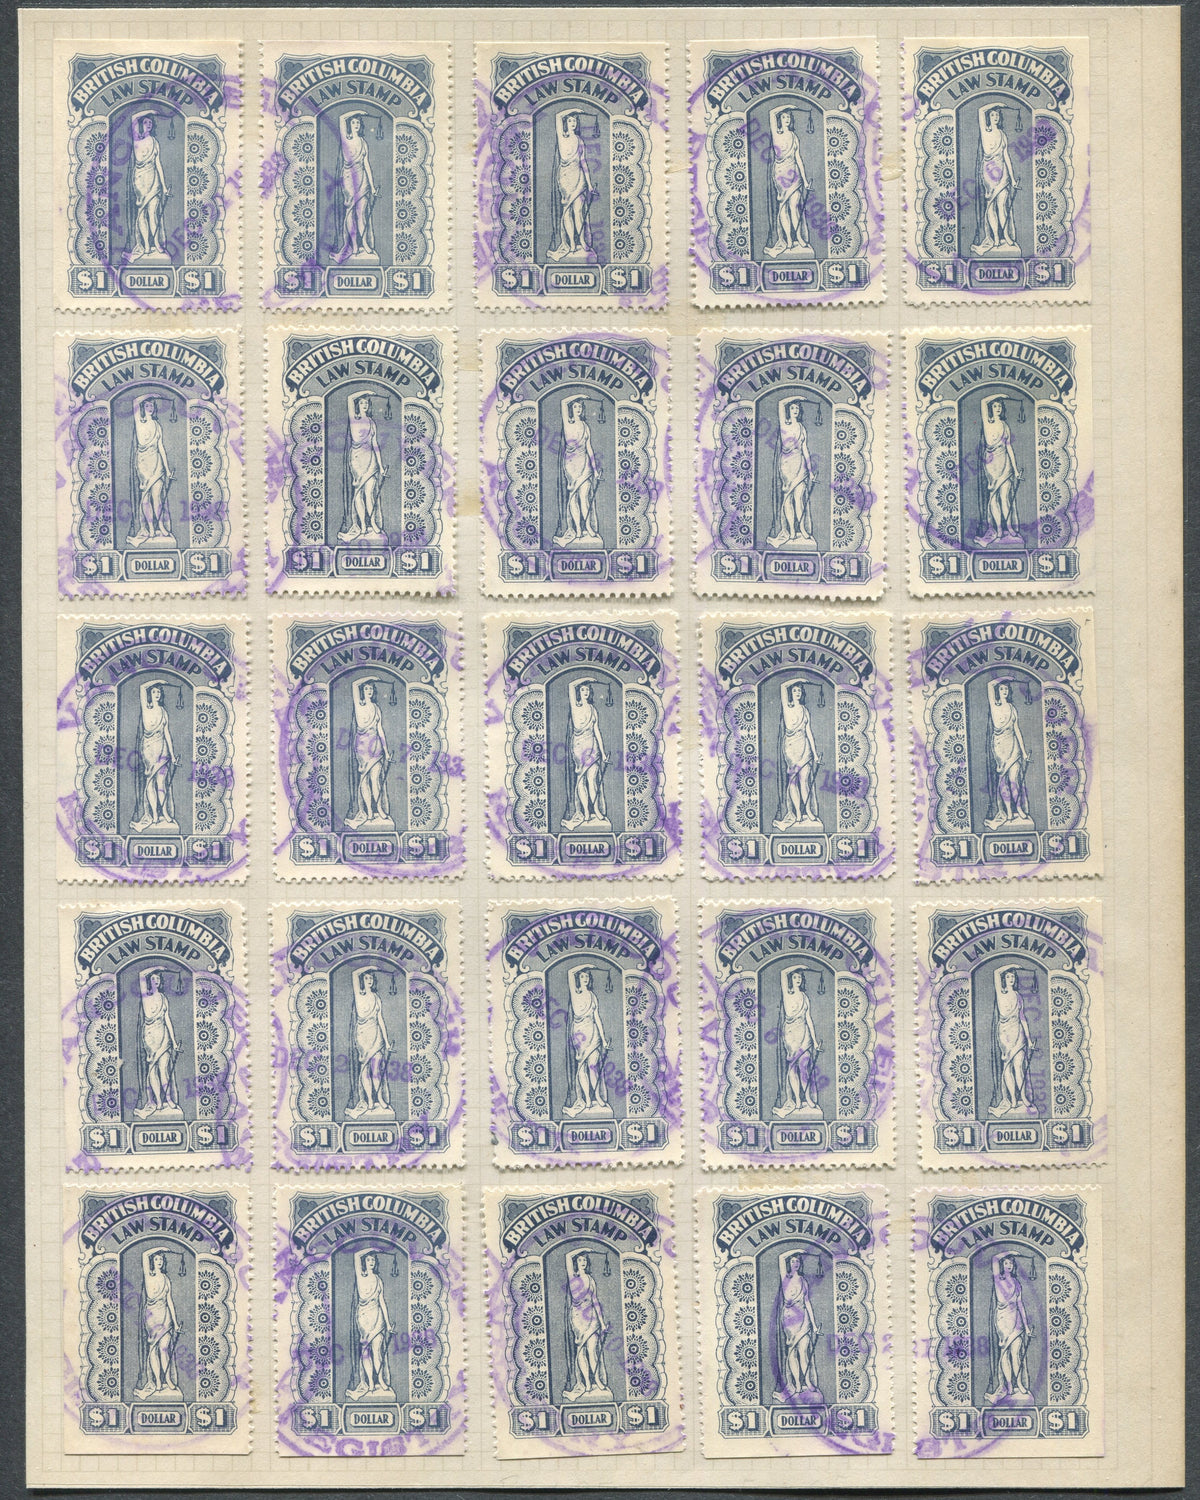 0035BC2010 - BCL35a - Used Reconstructed Sheet